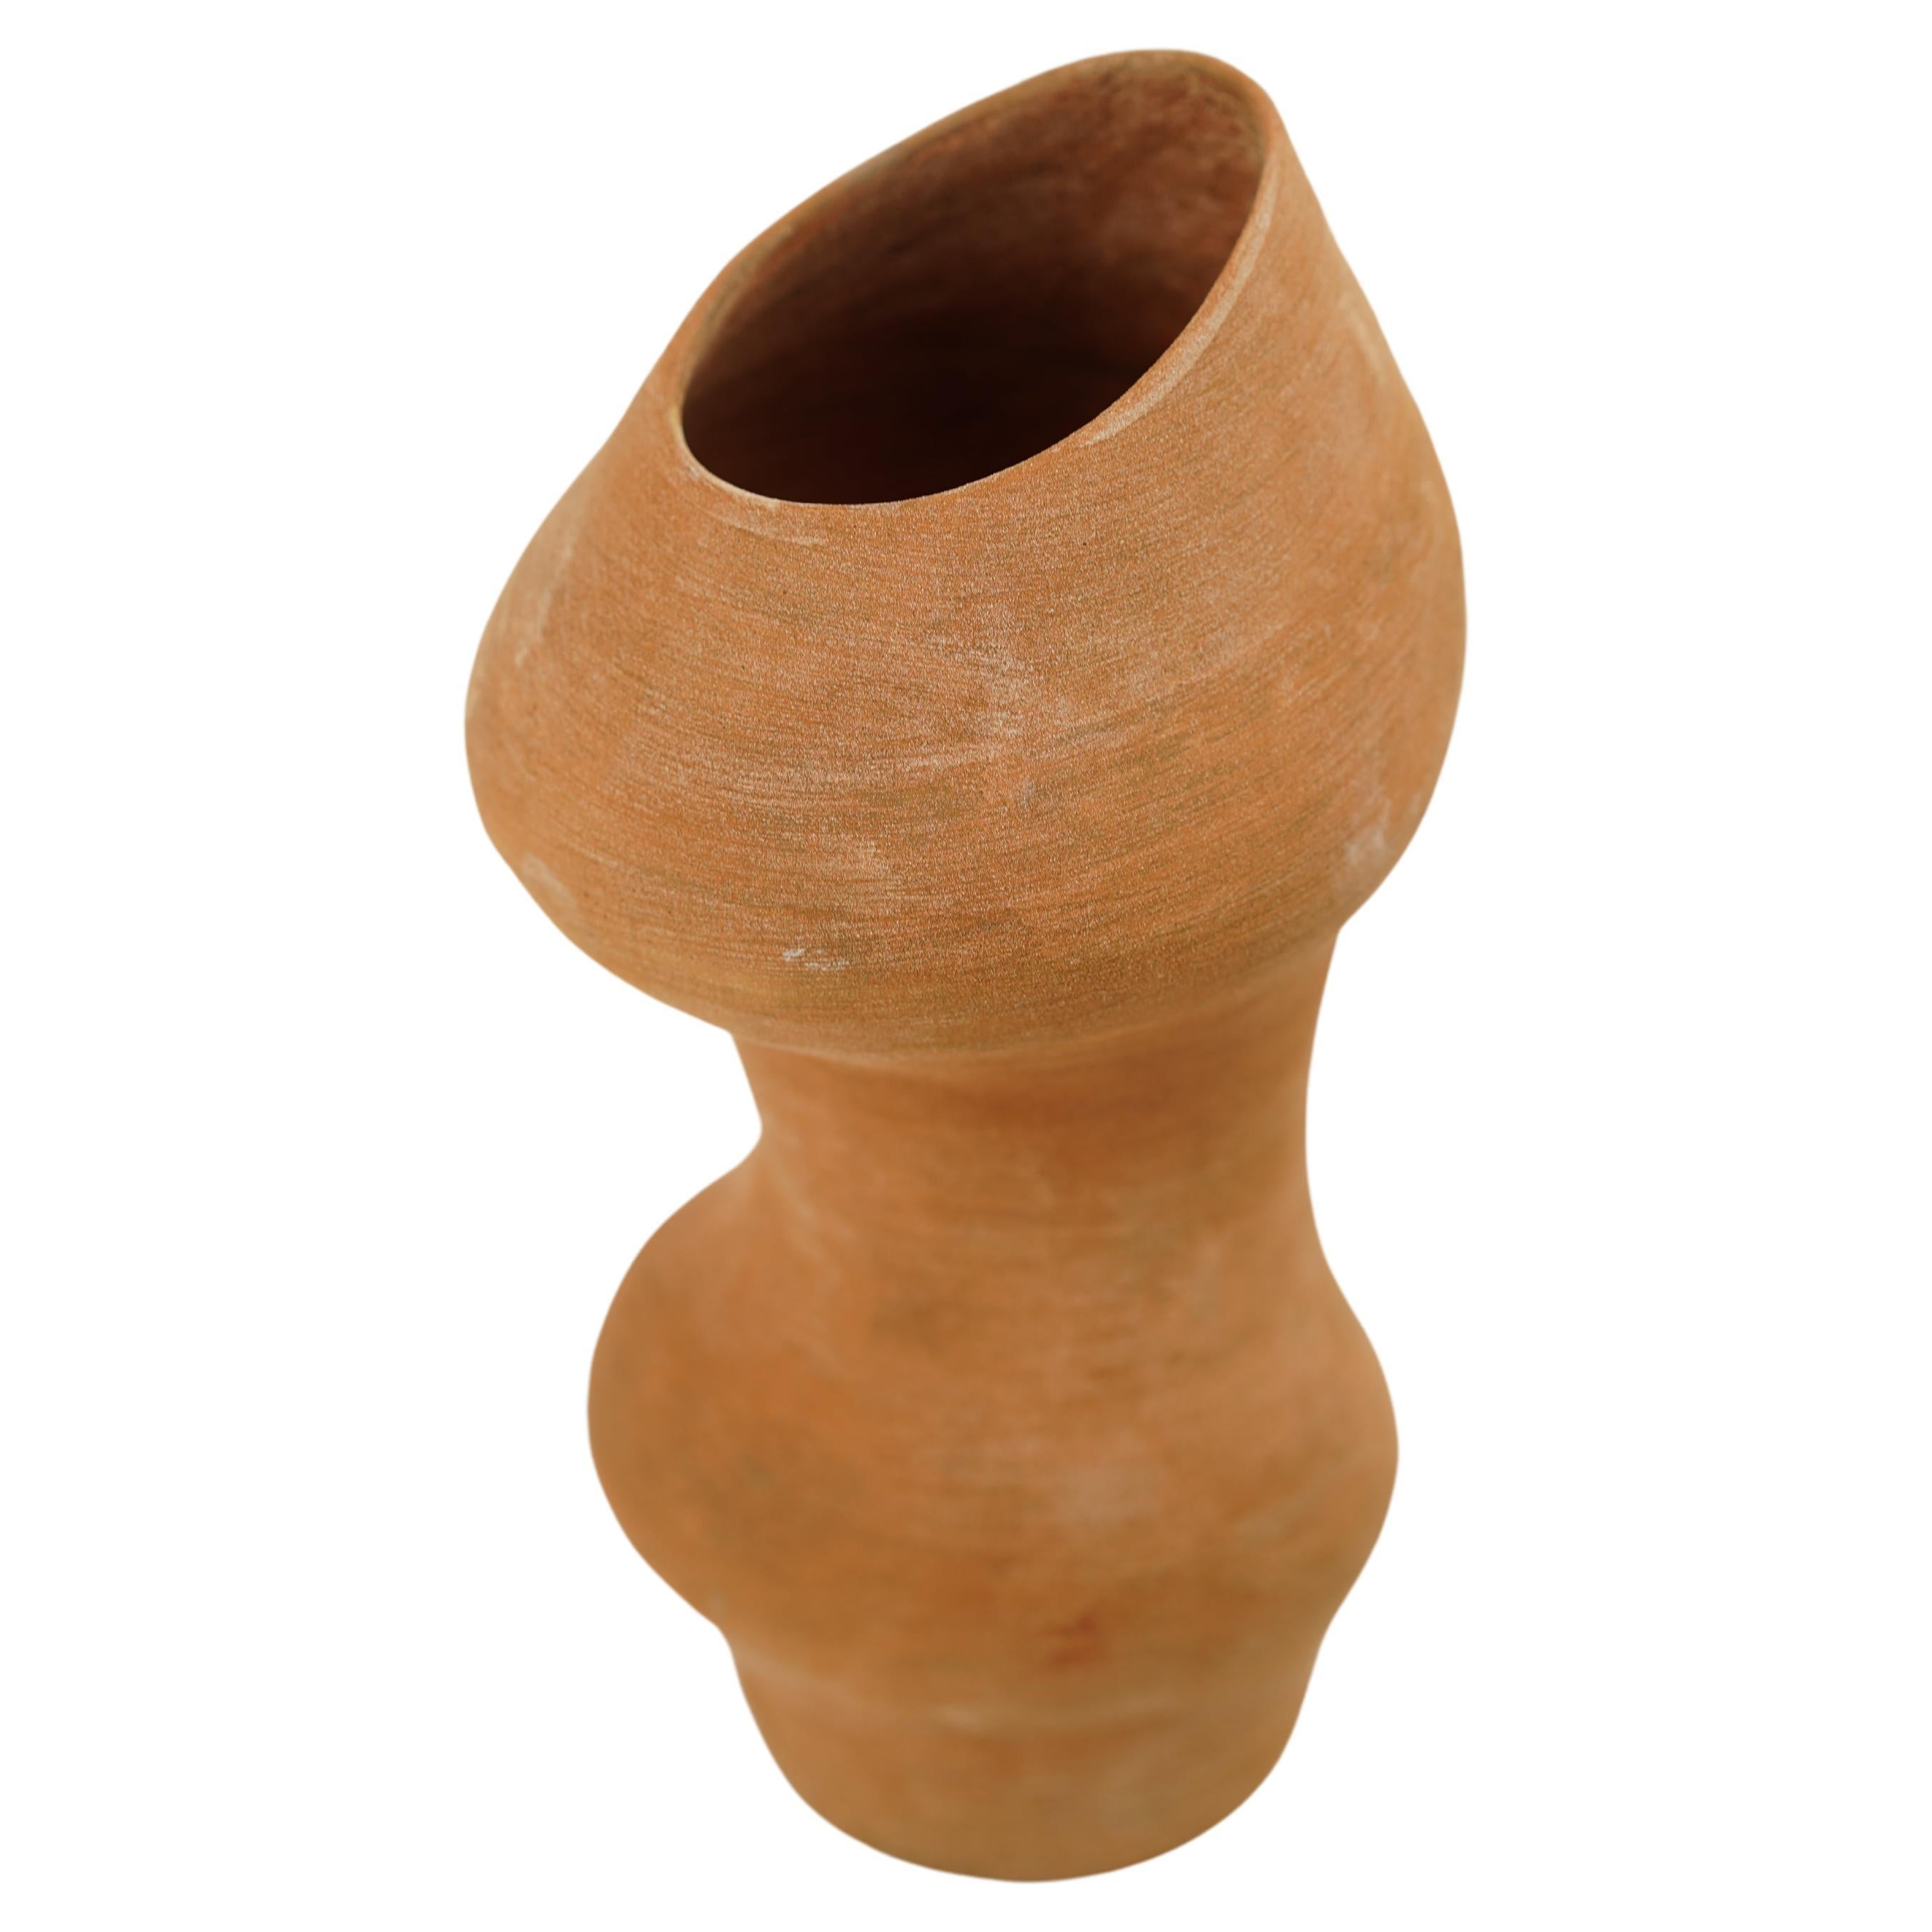 Organic Sandy Canyon Vase, Available in 3 Sizes